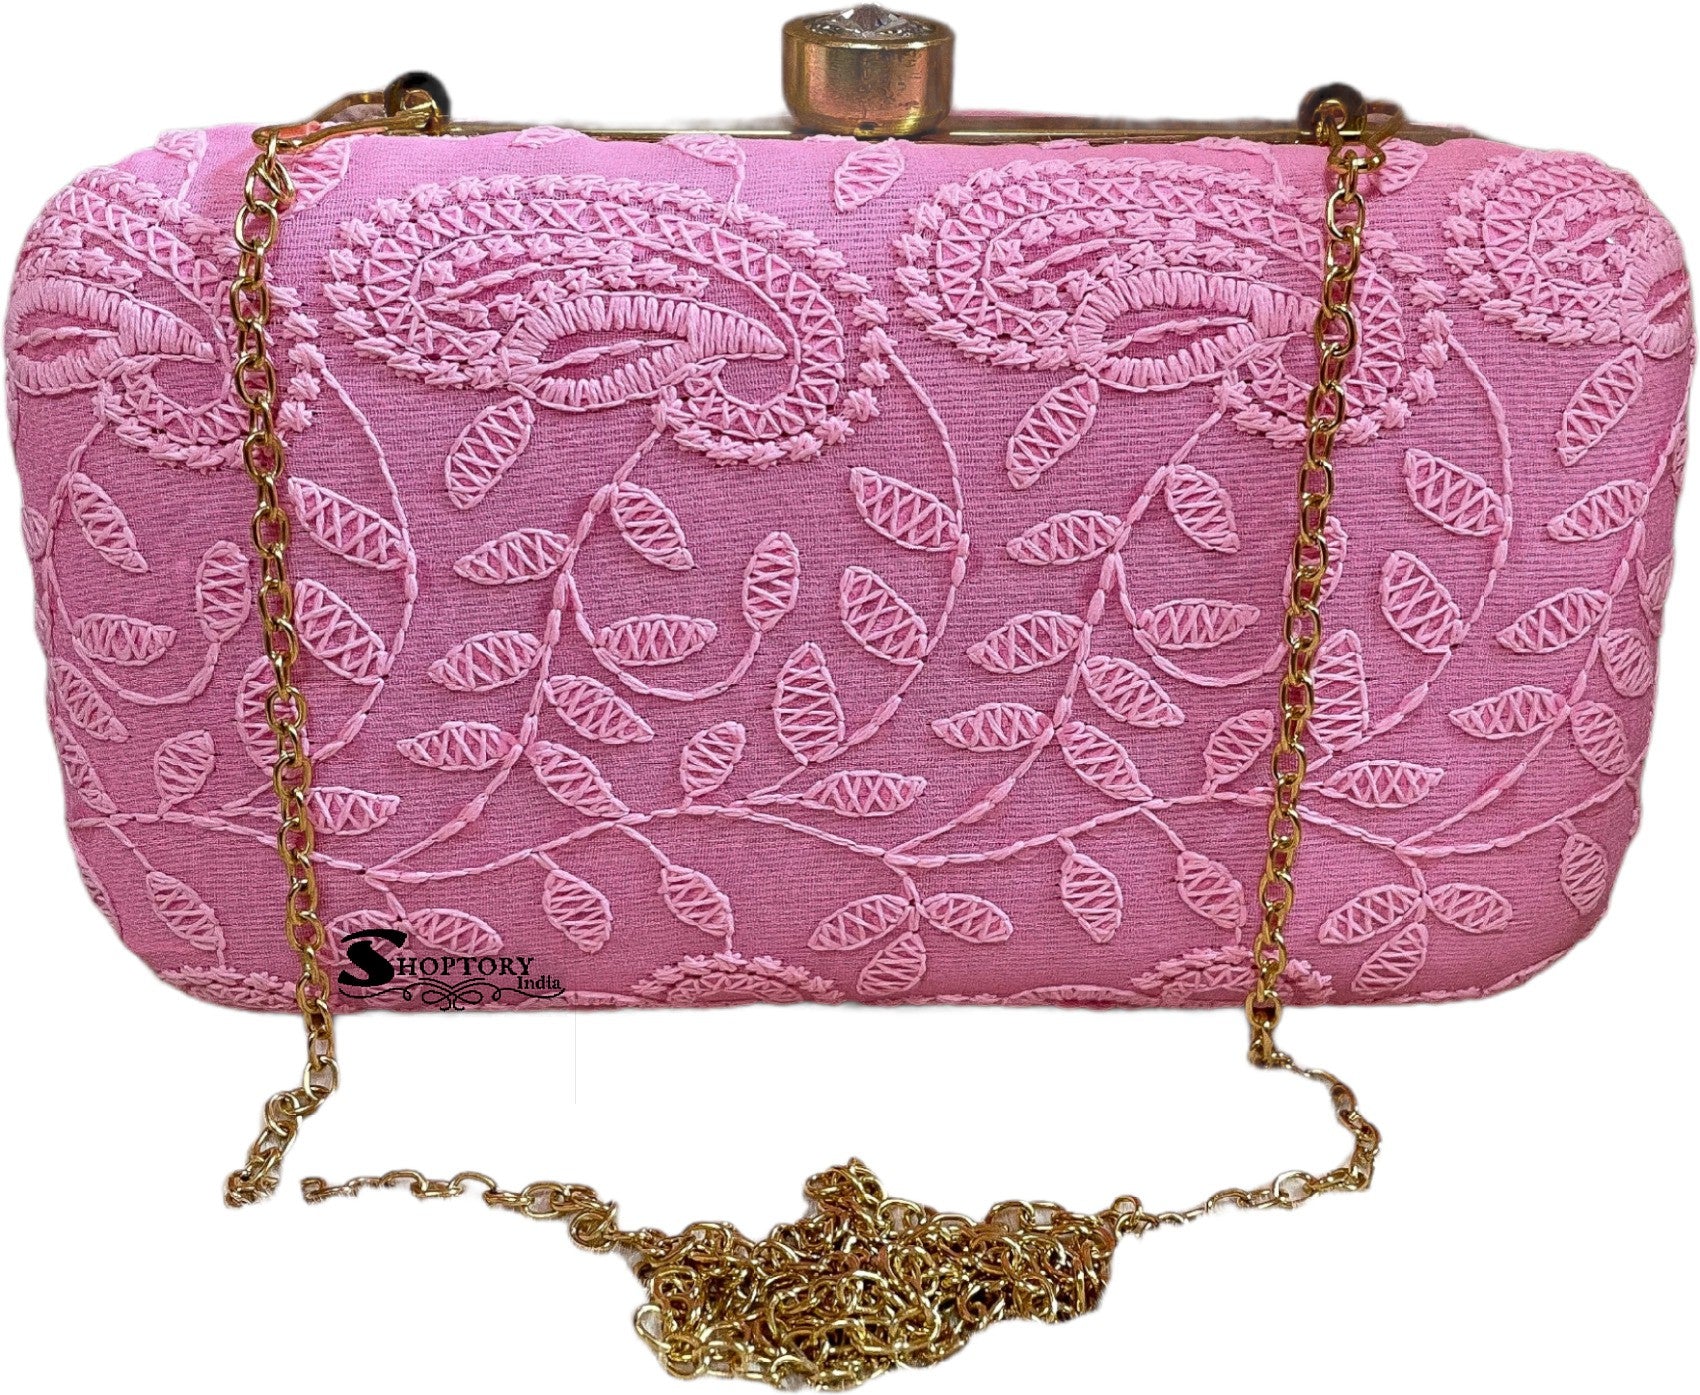 Women's Chickenkari Embroidered Crossbody Belt Sling Bag With Clutch  Pink - Ritzie